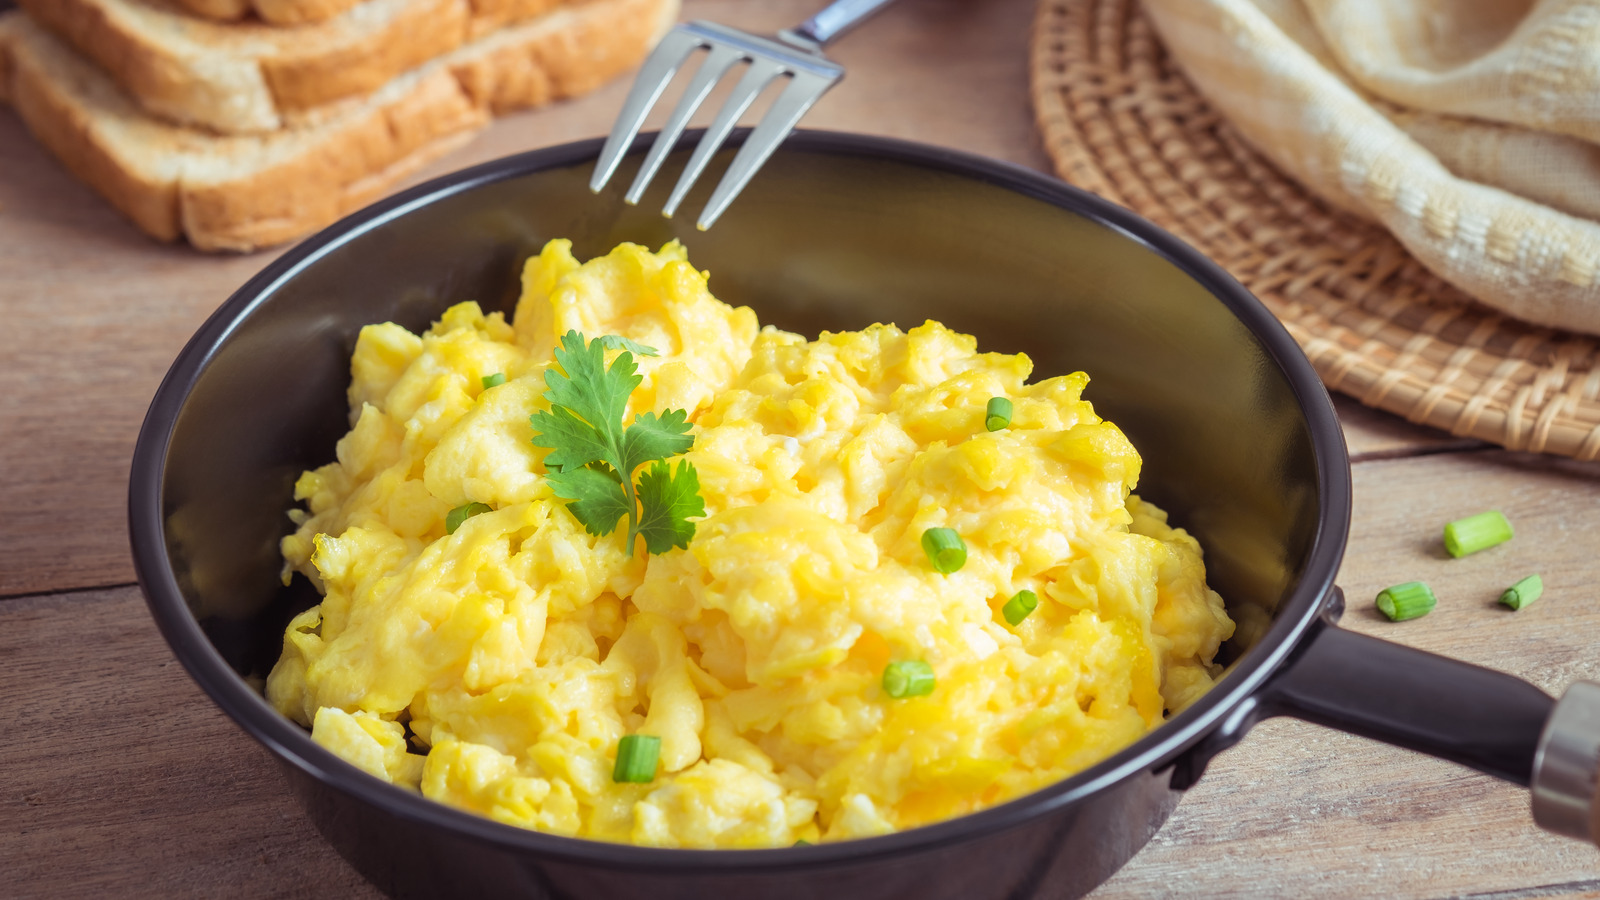 https://www.mashed.com/img/gallery/14-best-chefs-techniques-for-scrambled-eggs-ranked/l-intro-1674495153.jpg